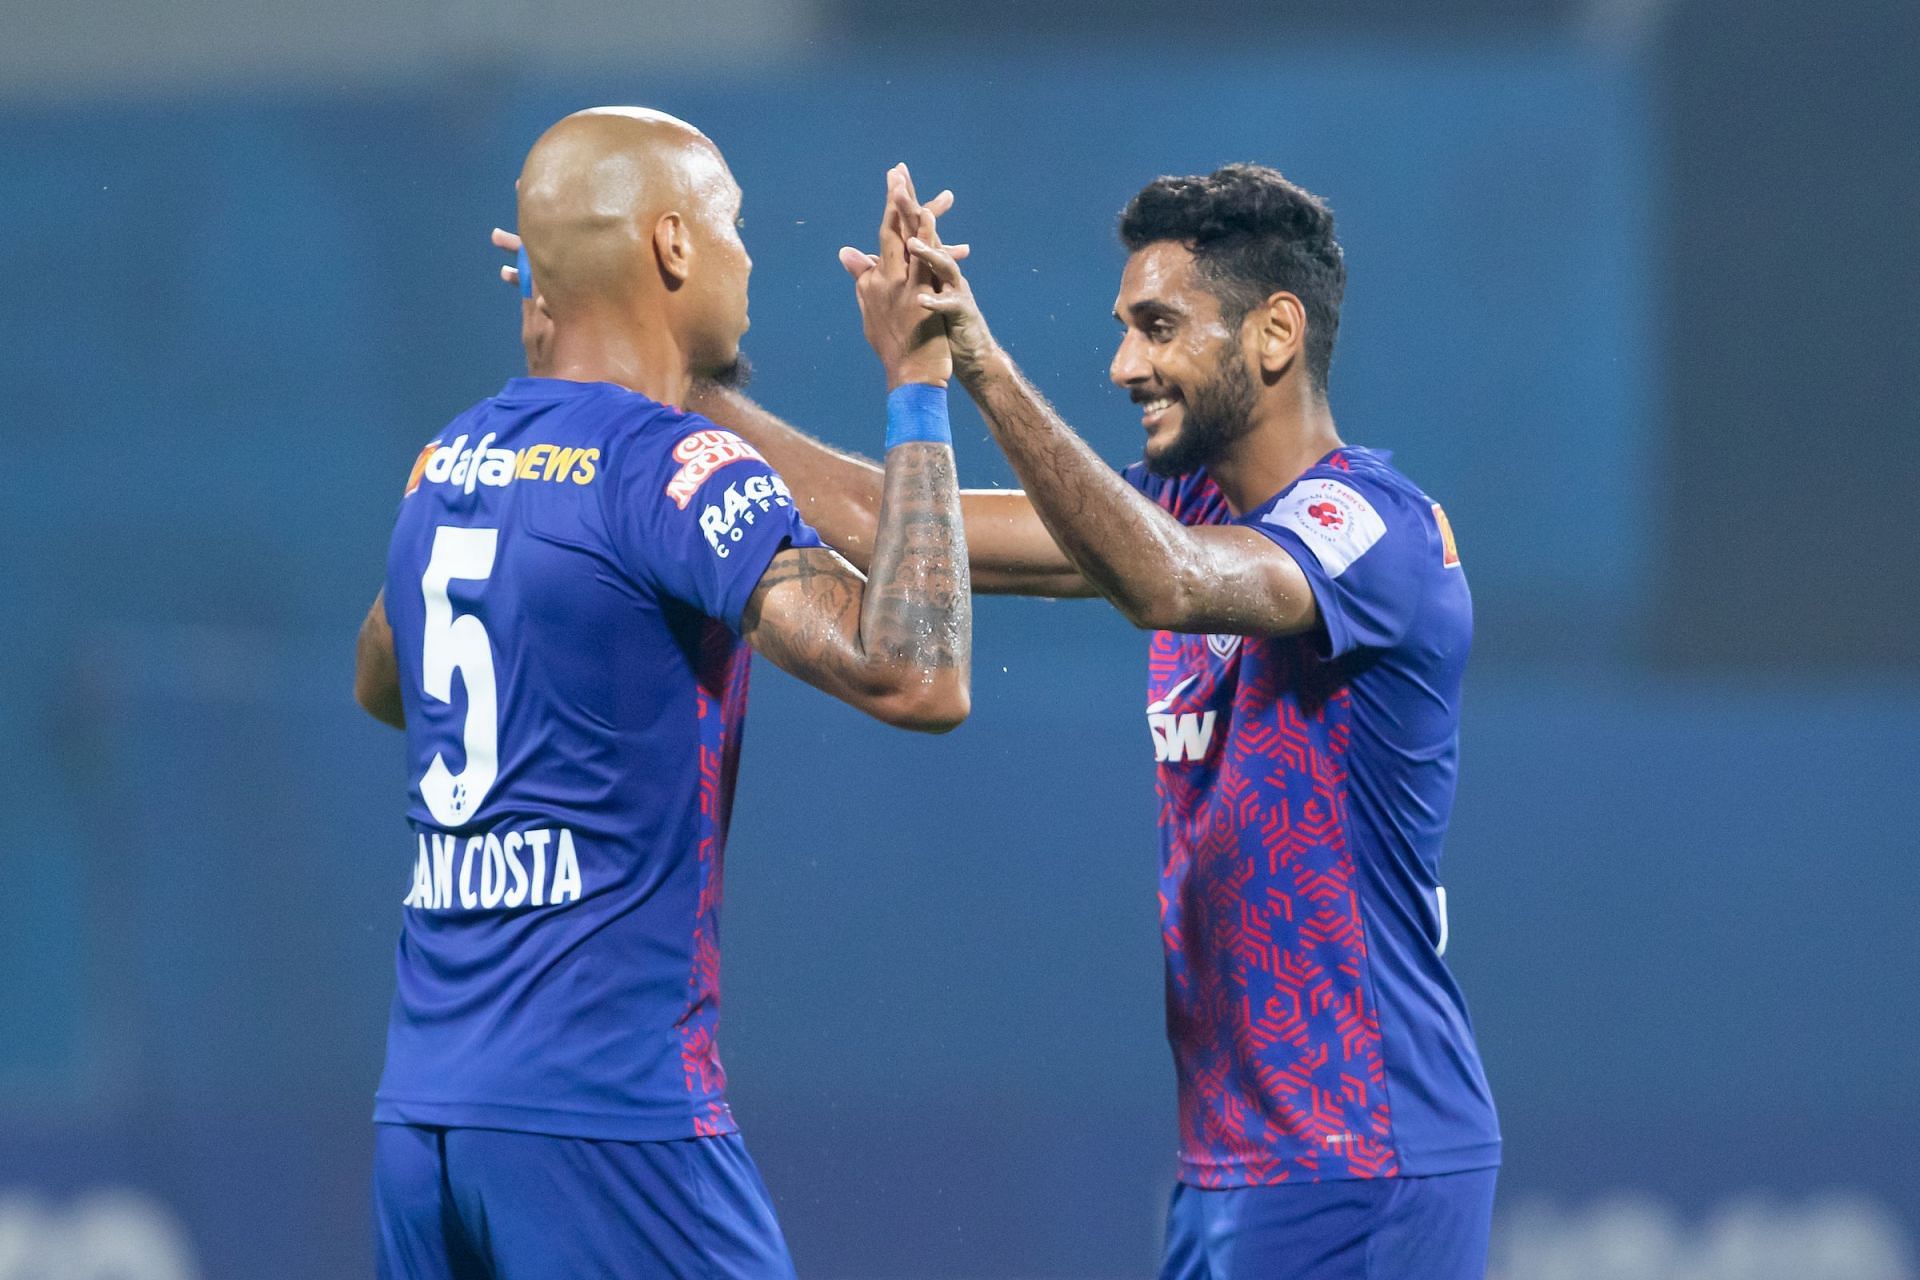 Bengaluru FC take the game away from Odisha FC in the second half (Image Courtesy: ISL)